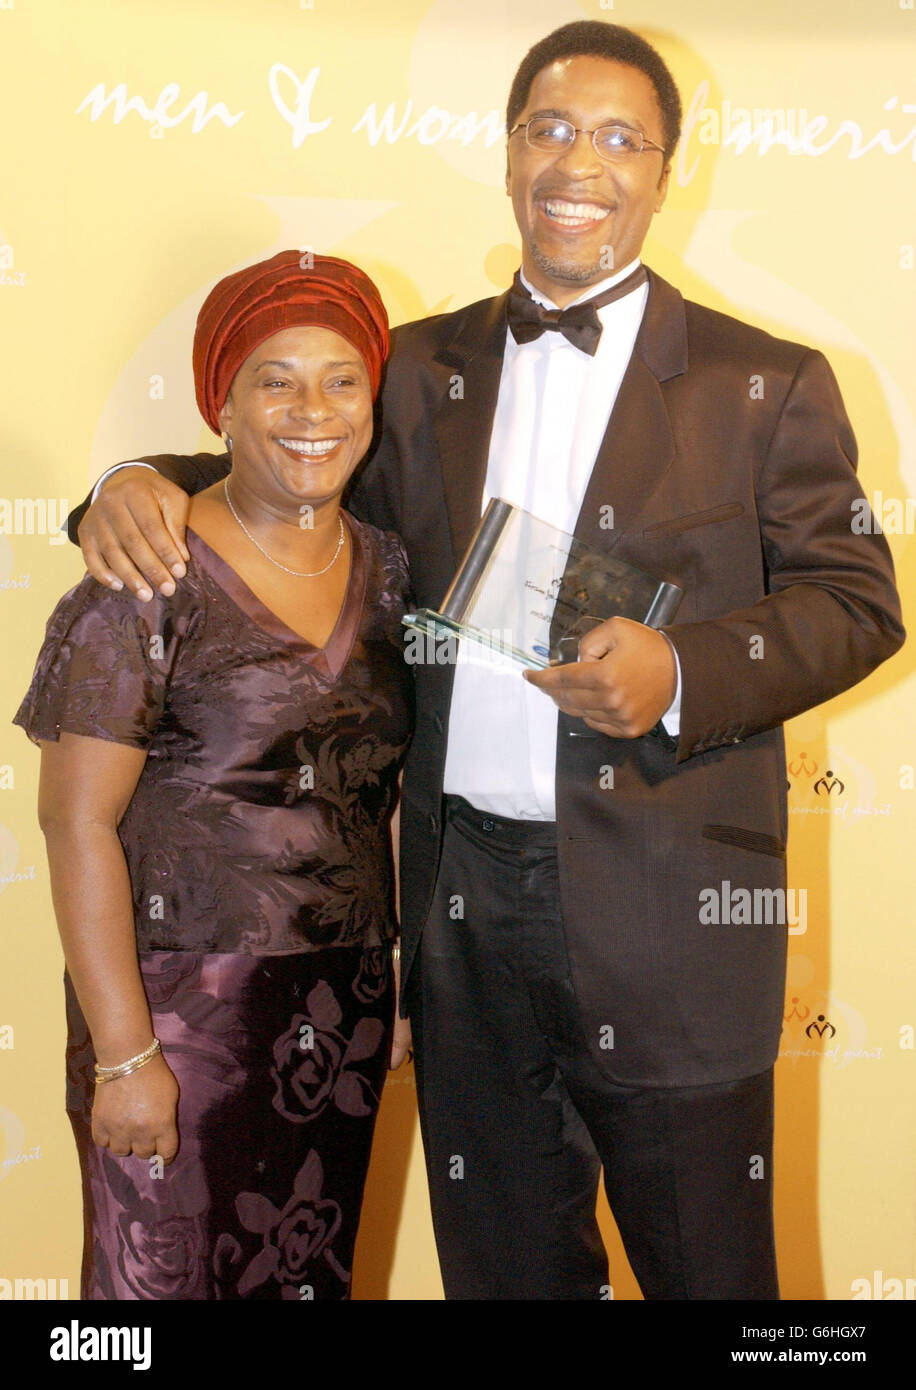 Black people who have made outstanding contributions to British society, were honoured at a ceremony celebrating their achievements. The Men and Women of Merit 2003 awards, held in central London. * Among those honoured were retired boxer Michael Watson whose life was shattered when he sustained a brain injury in a 1991 world title super middleweight clash with Chris Eubank, and Doreen Lawrence OBE, mother of race murder victim Stephen Lawrence. Stock Photo